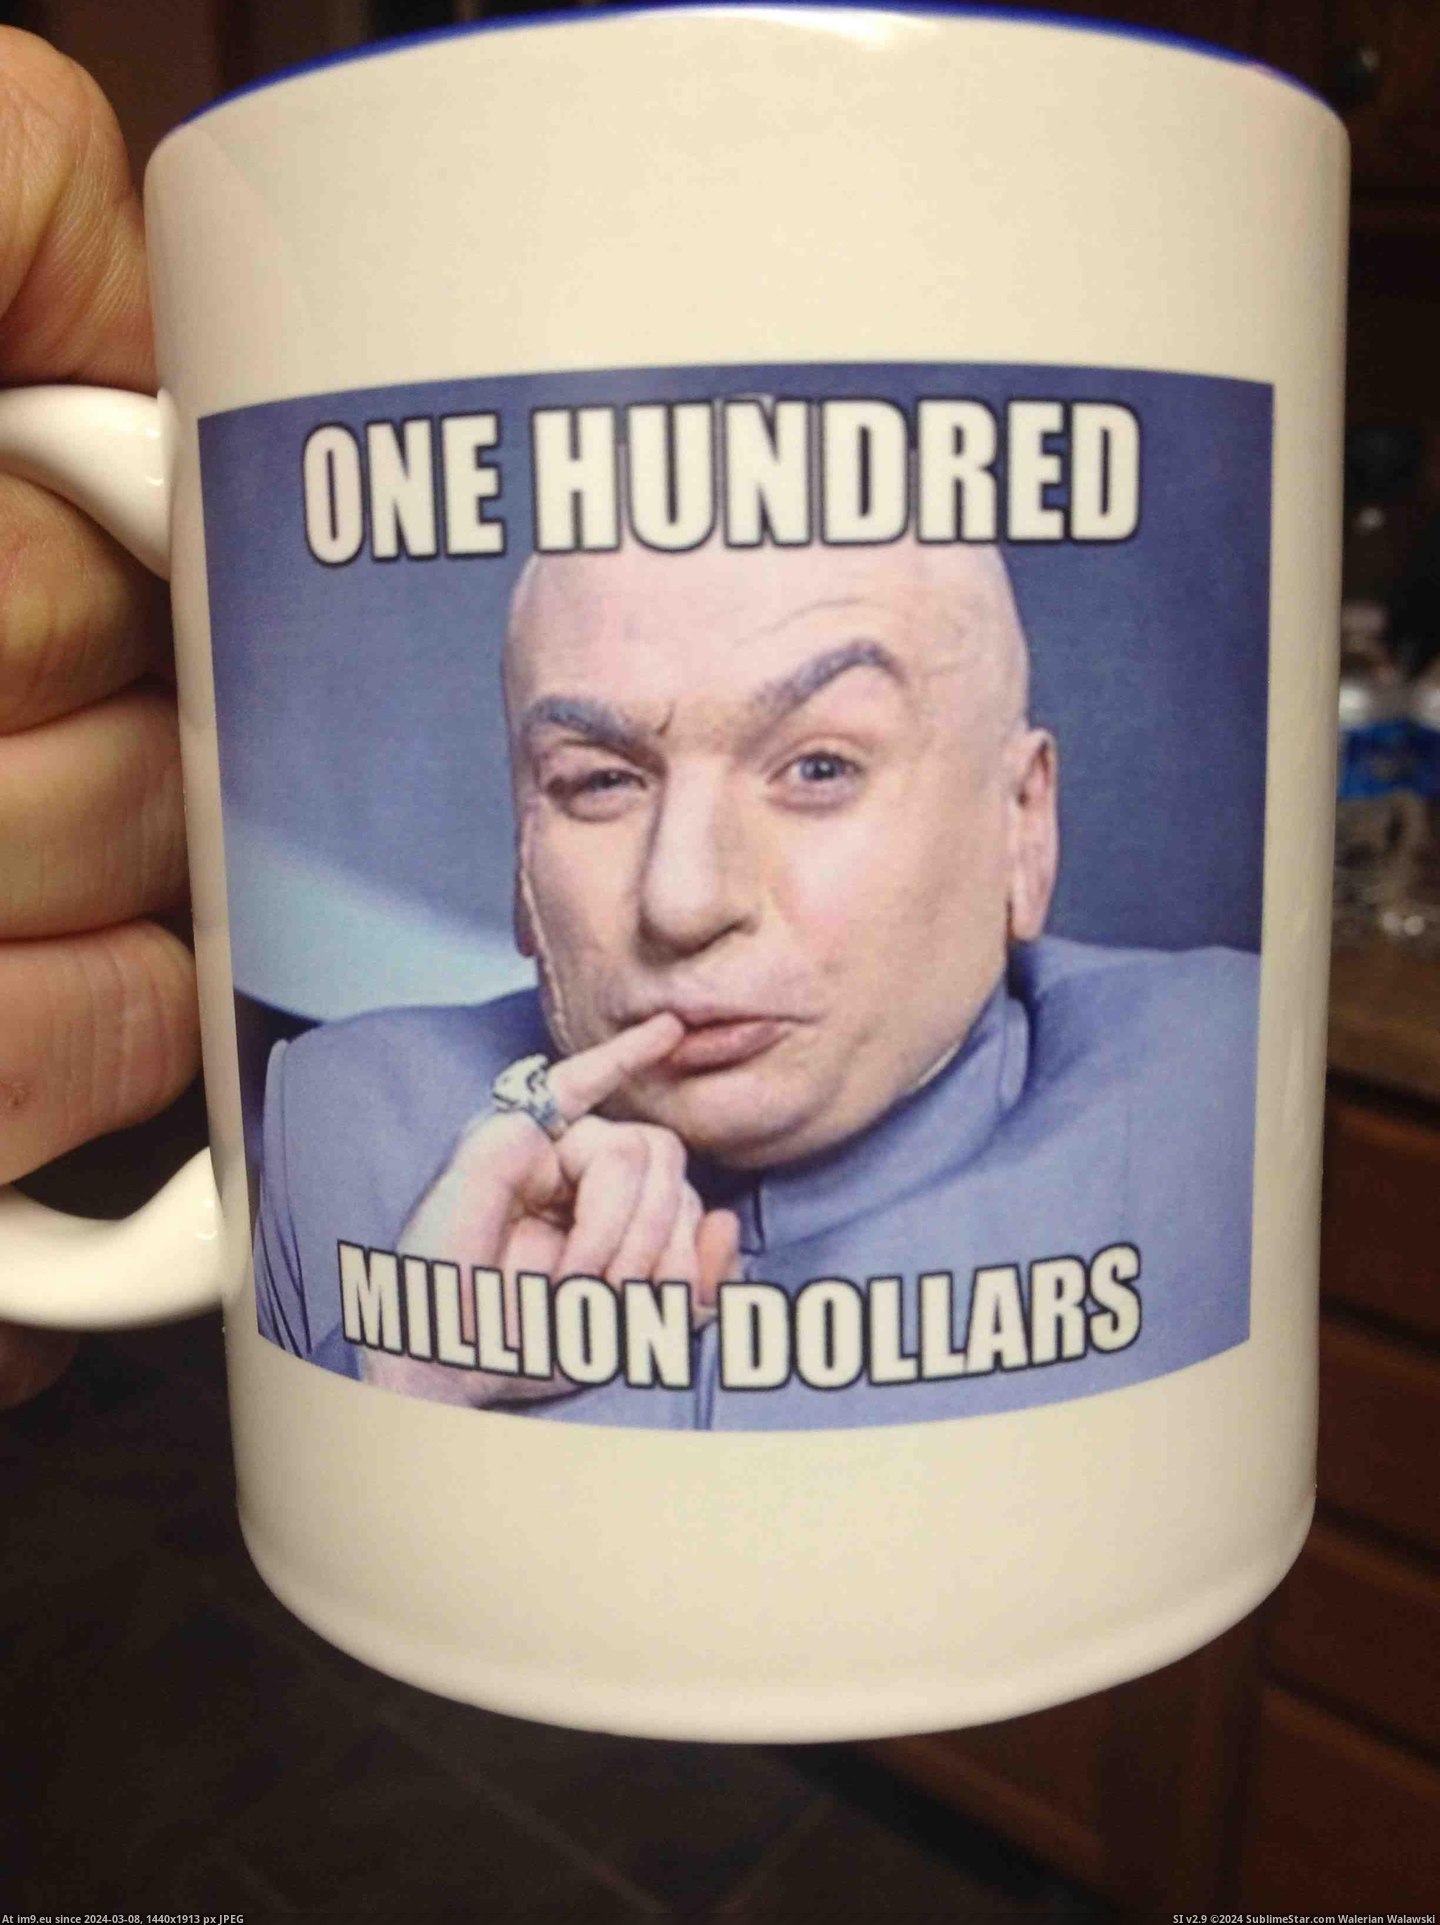 #Funny #Year #Dad #Works #Important #Sales #Mugs #Milestone #Gave #Reached #Company #Celebrate [Funny] The company my dad works for reached an important milestone last year for sales. They gave out mugs to celebrate. Pic. (Изображение из альбом My r/FUNNY favs))